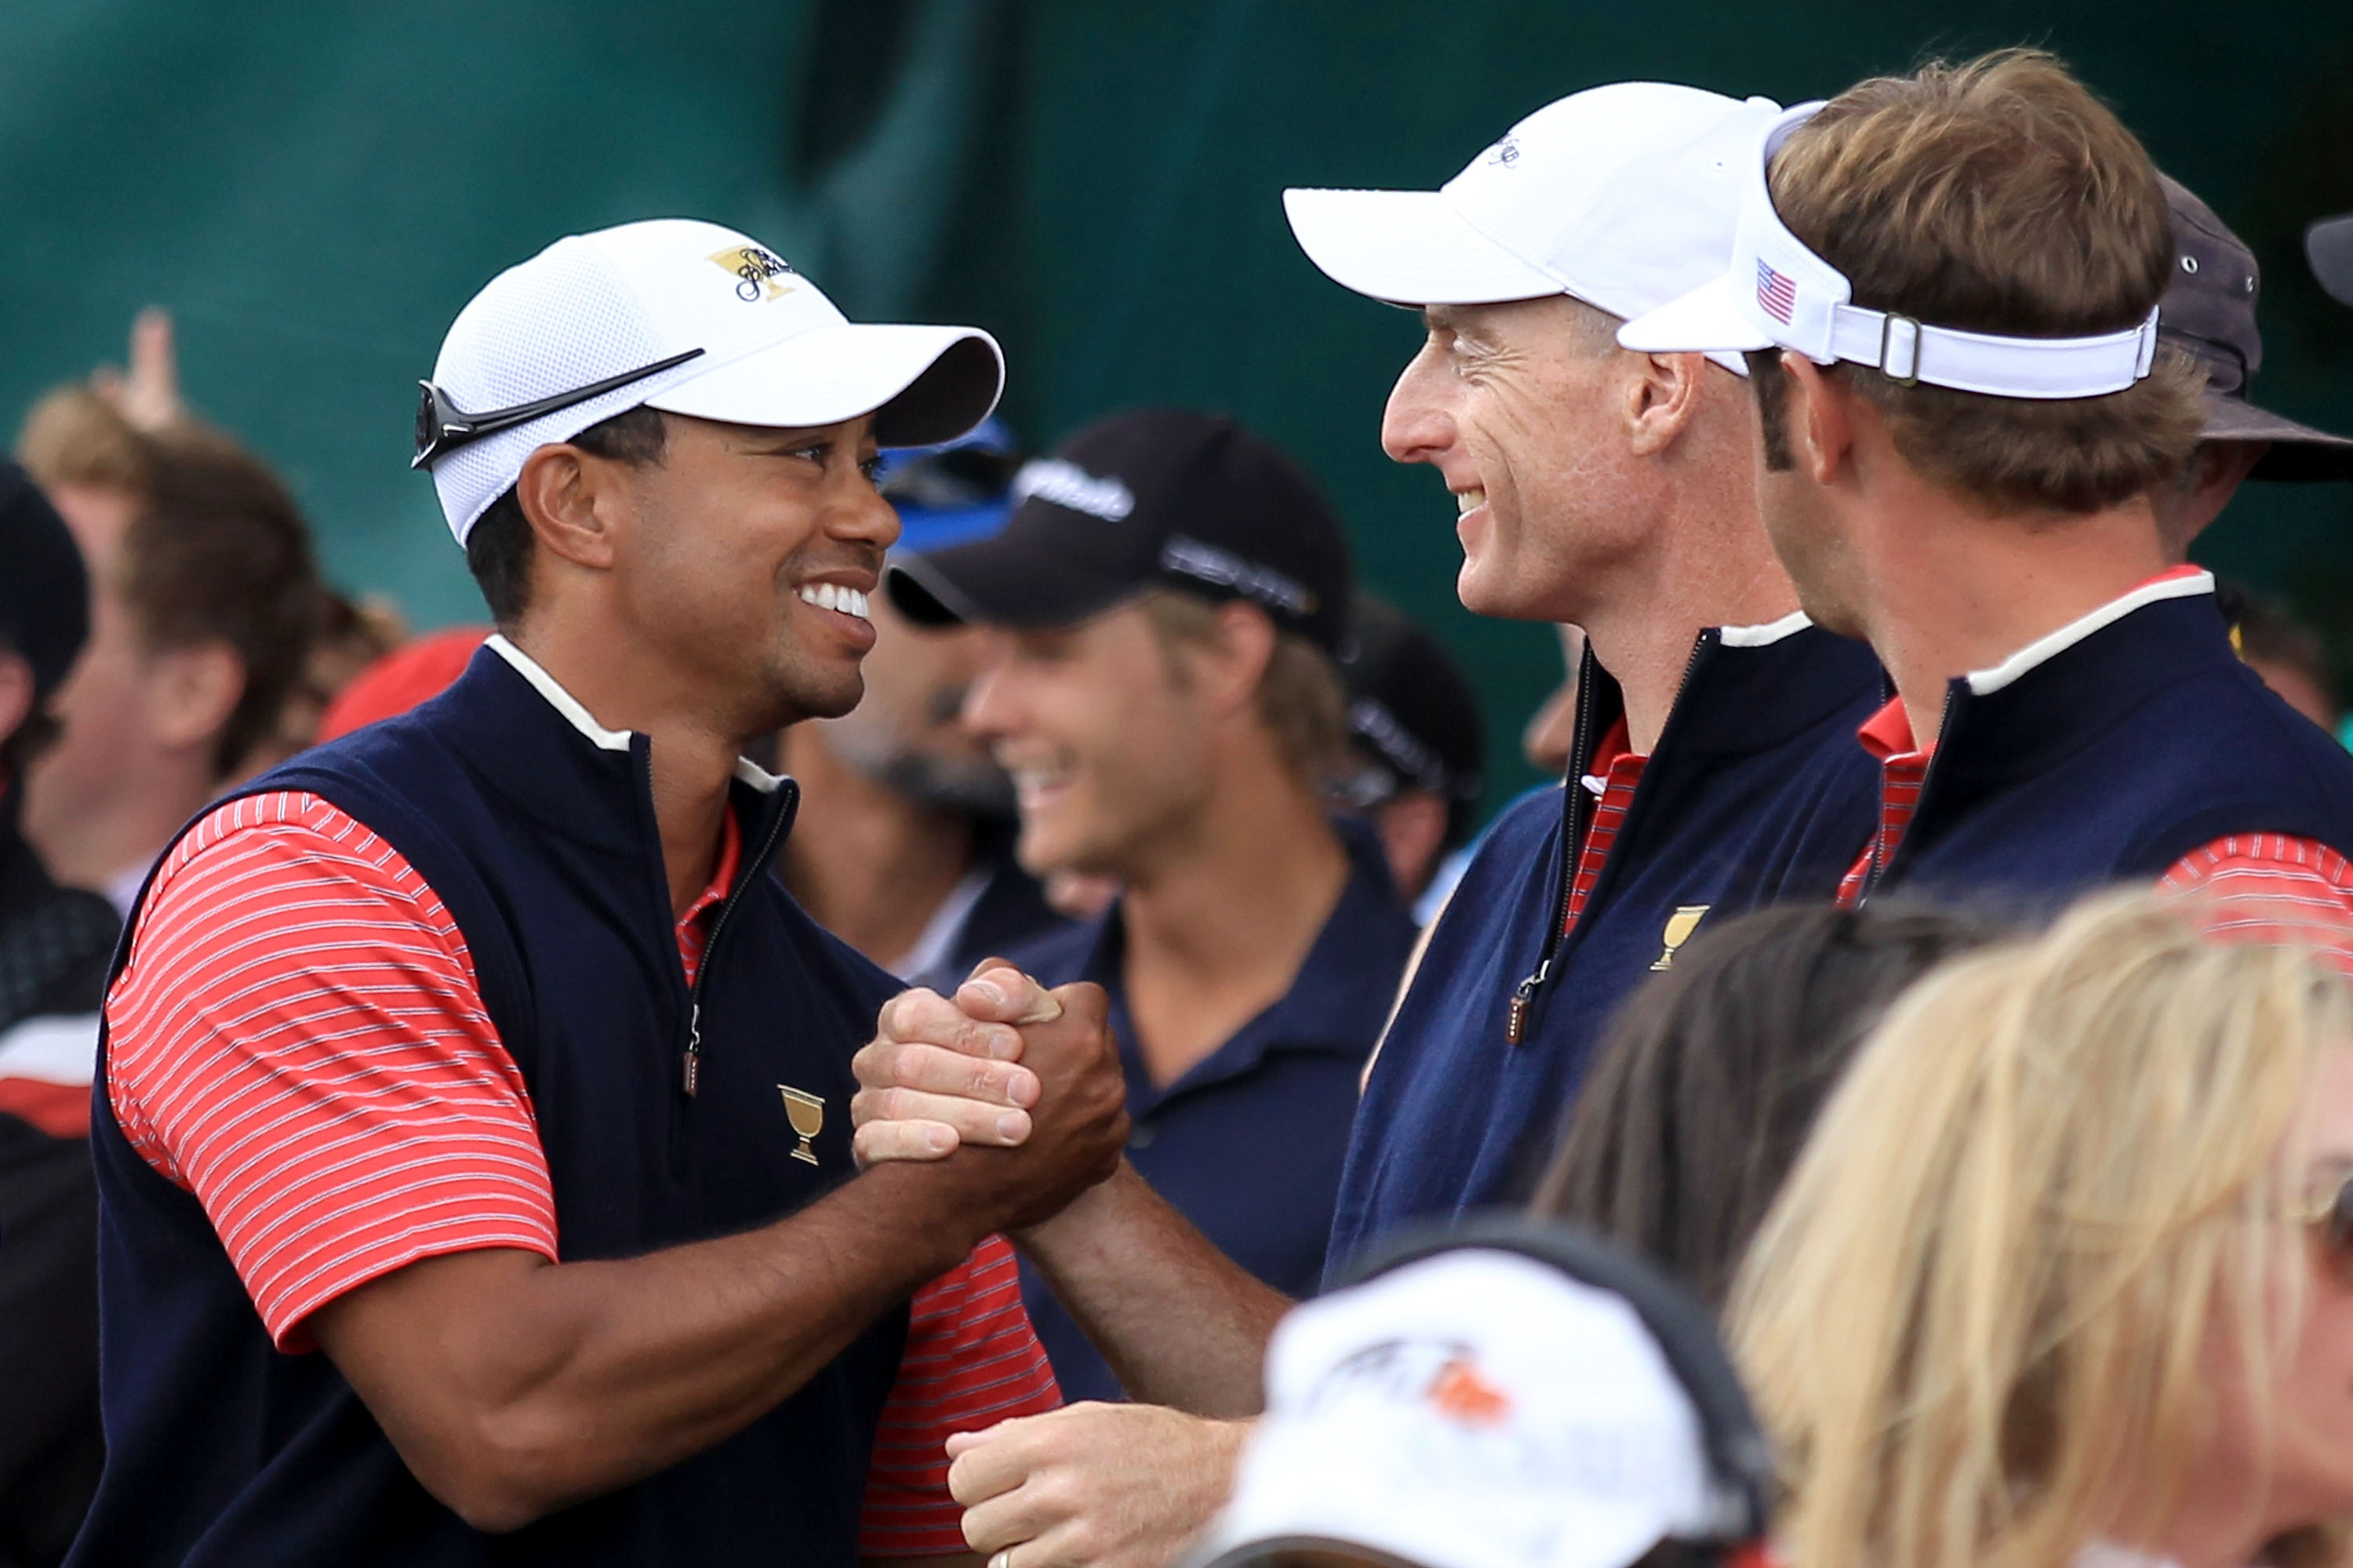 Tiger Woods of the U.S. shakes hands with teammate Jim Furyk after Woods clinched the Presidents Cup with a 4-and-3 victory over Aaron Baddeley.Tiger Woods of the U.S. shakes hands with teammate Jim Furyk after Woods clinched the Presidents Cup with a 4-and-3 victory over Aaron Baddeley.